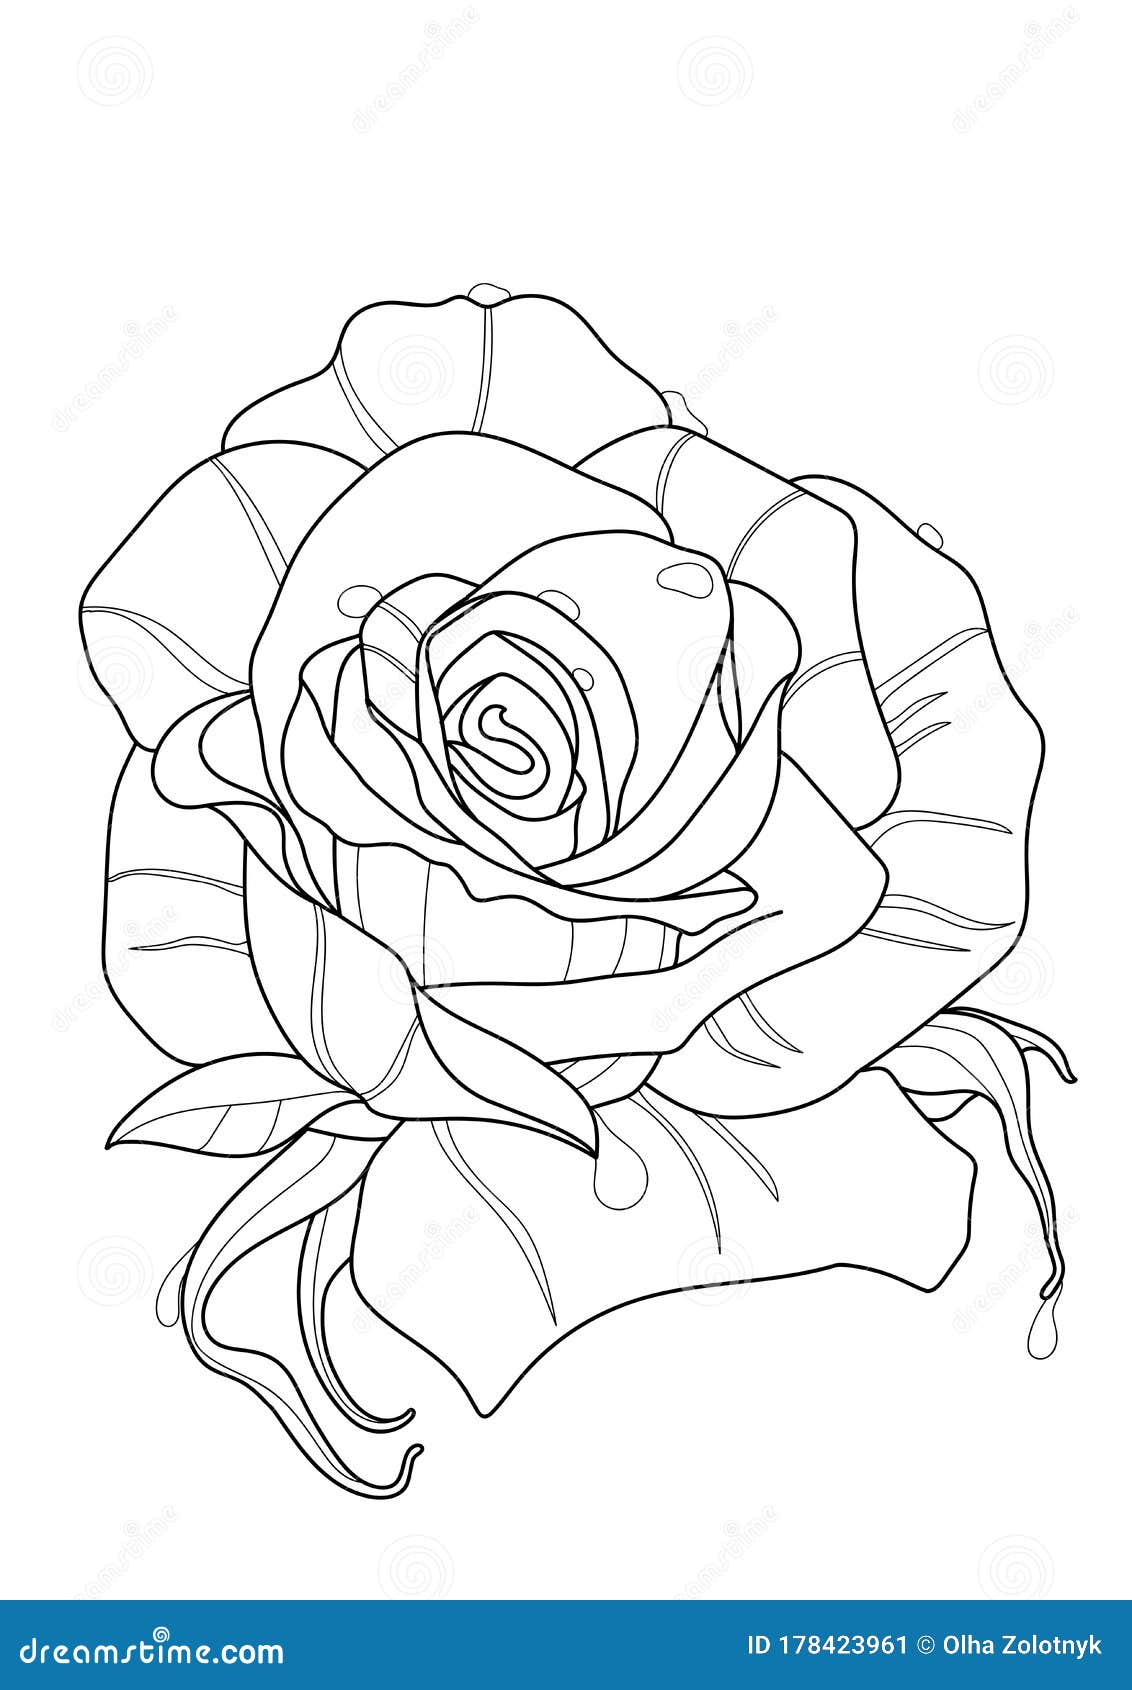 Rose Flower Drawing Illustration. Black and White with Line Art on ...